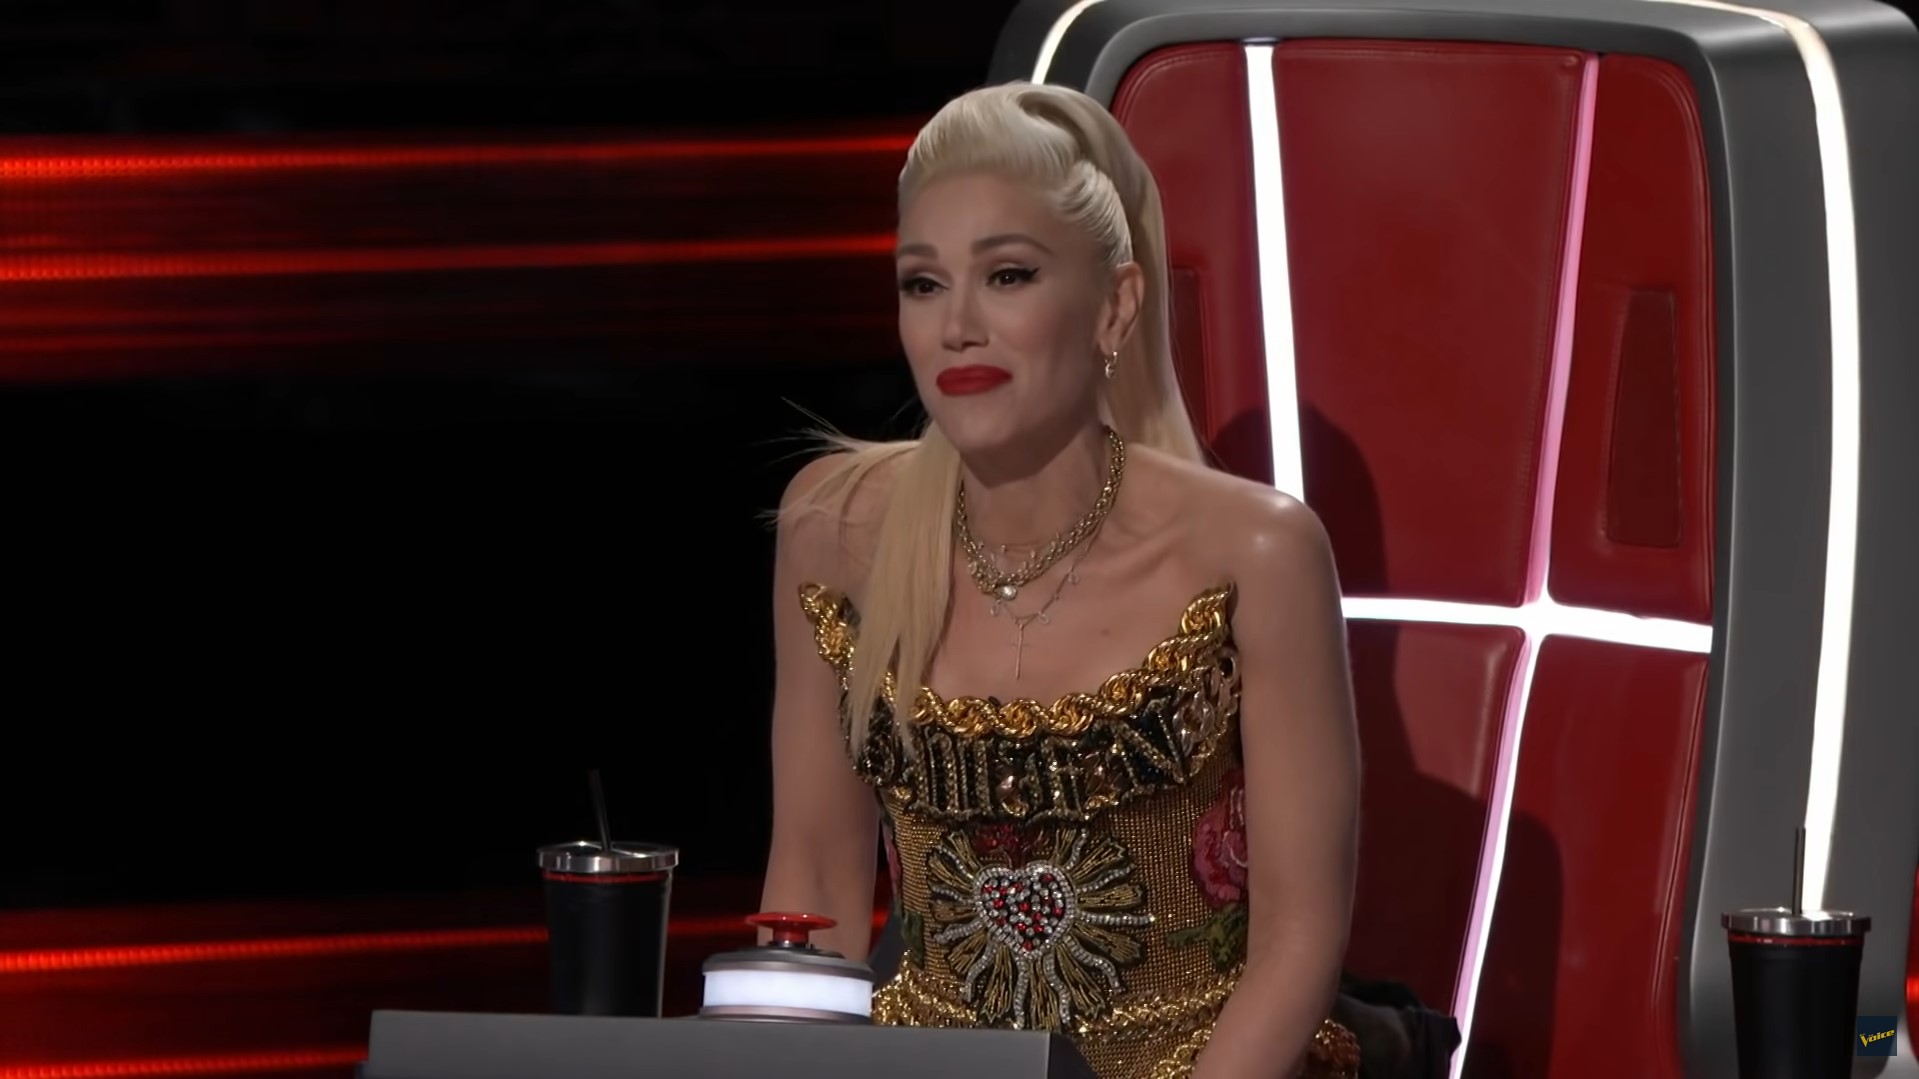 Why Did Gwen Stefani Leave The Voice?